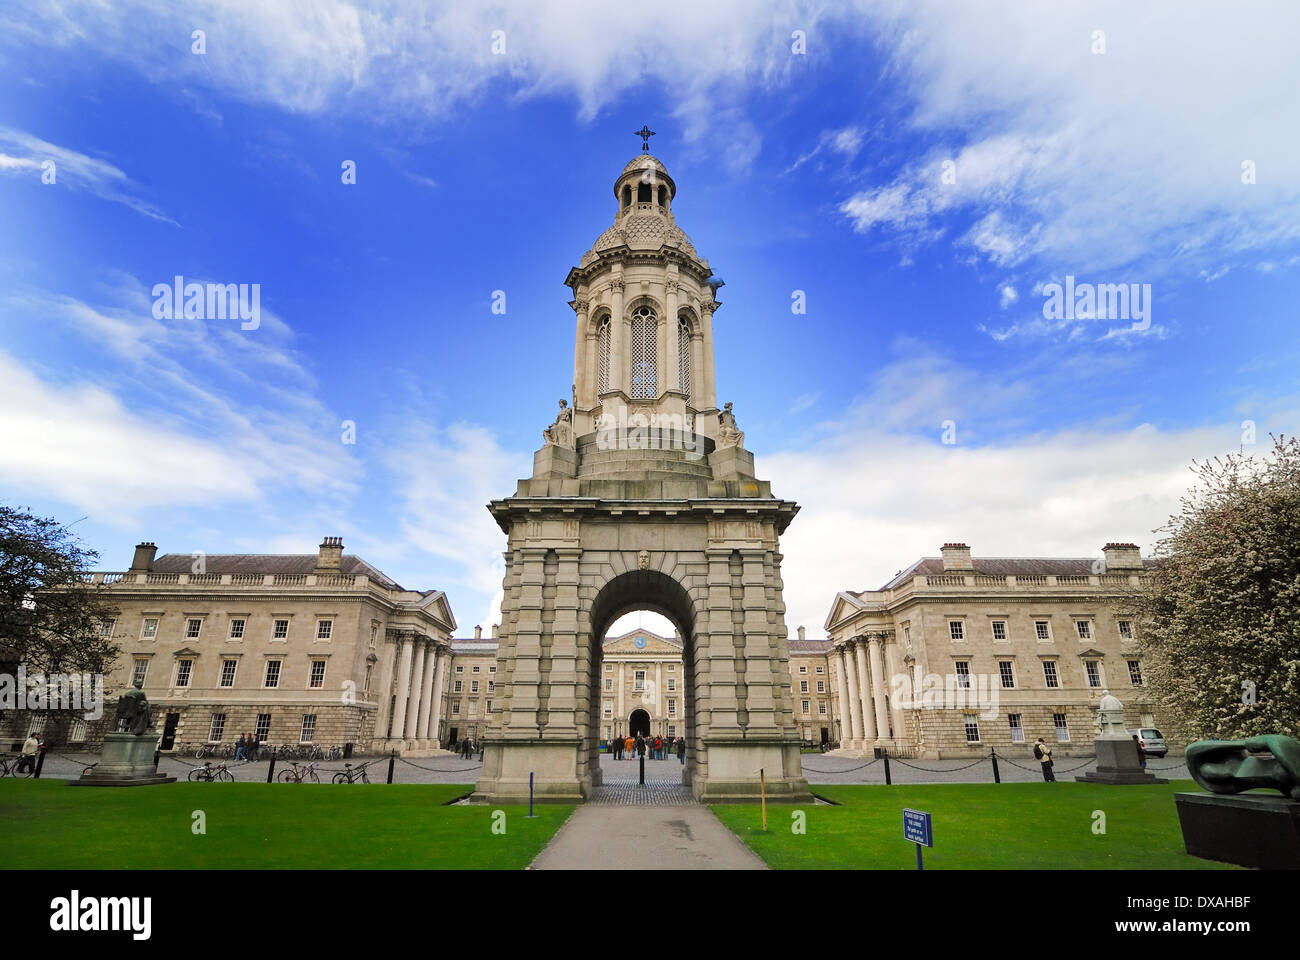 View of the main building at the entrance of the Trinity College, Dublin, Ireland Stock Photo